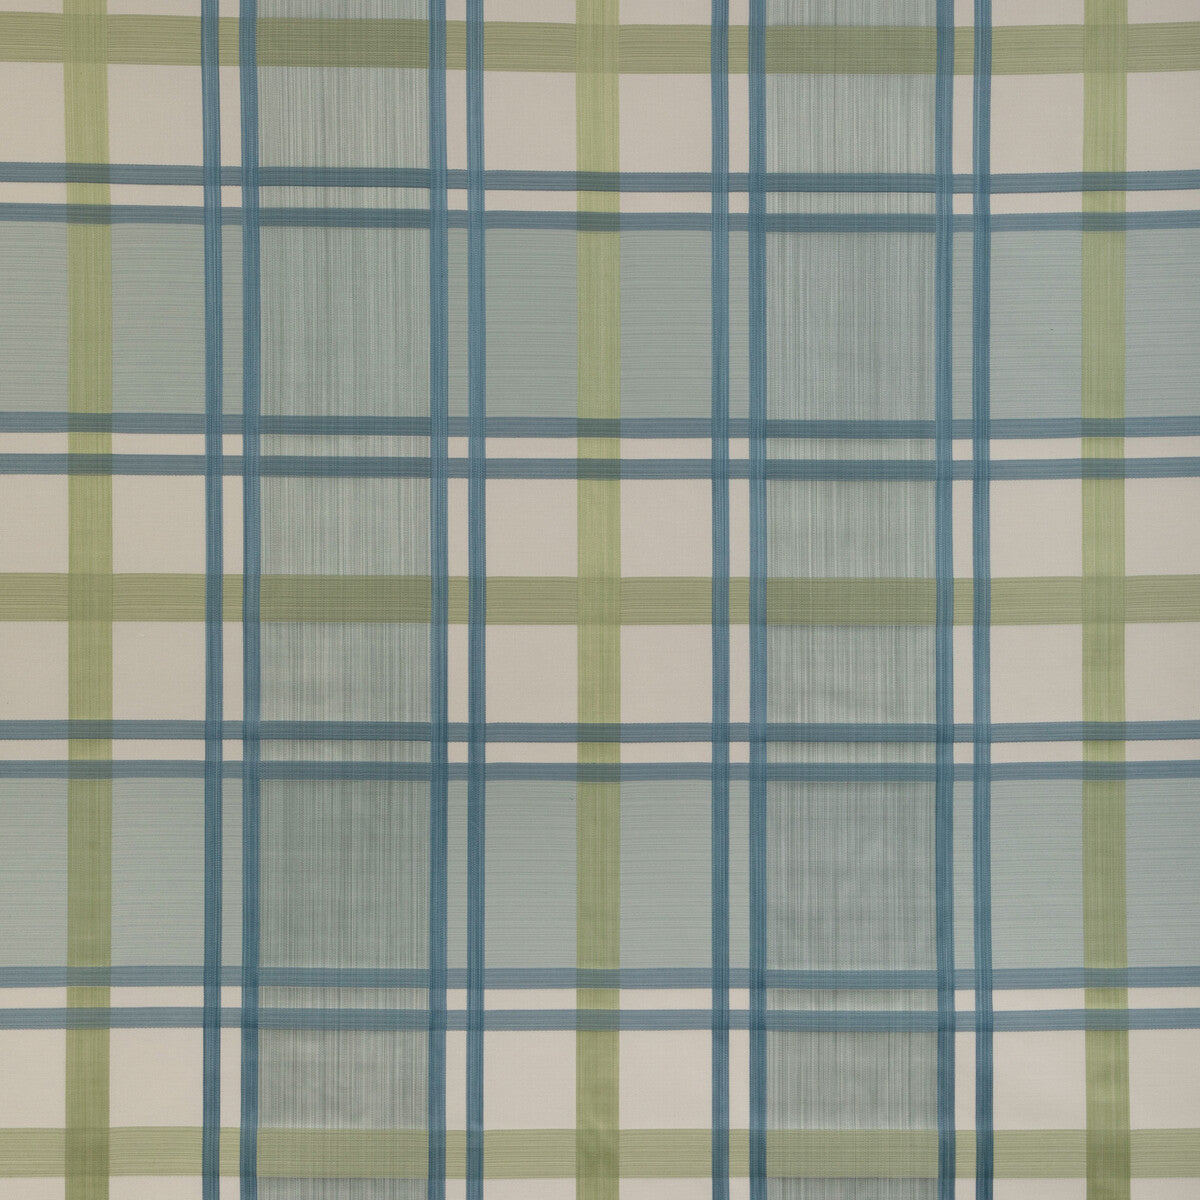 Davies Plaid fabric in aqua/leaf color - pattern 2023109.353.0 - by Lee Jofa in the Highfield Stripes And Plaids collection